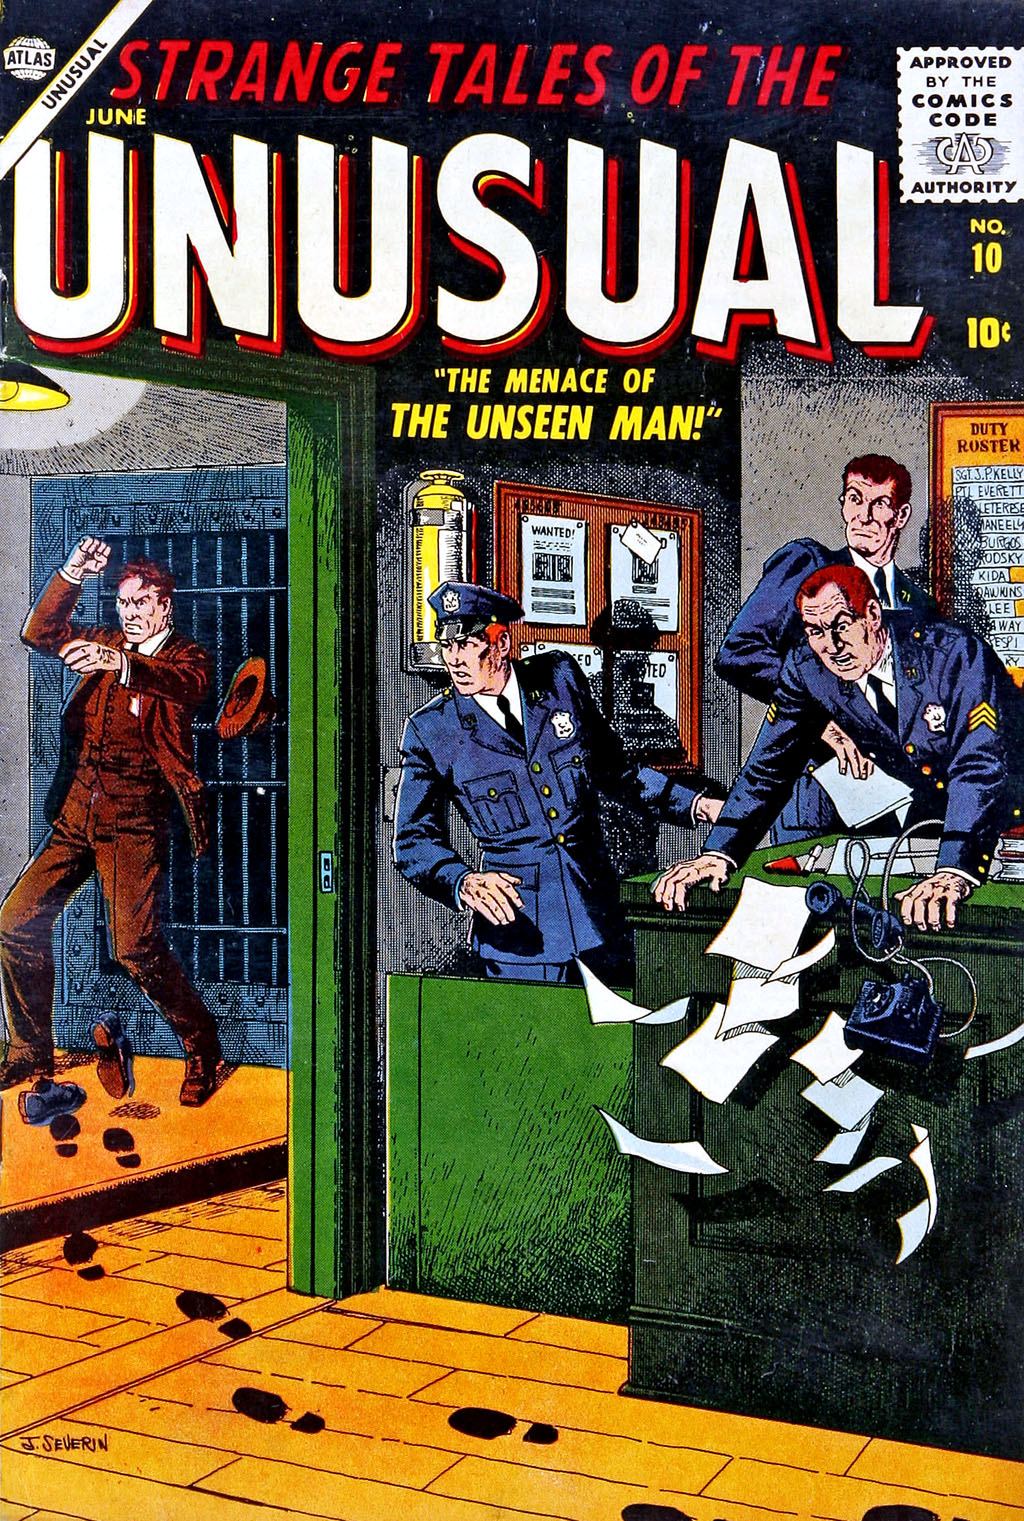 Read online Strange Tales of the Unusual comic -  Issue #10 - 1